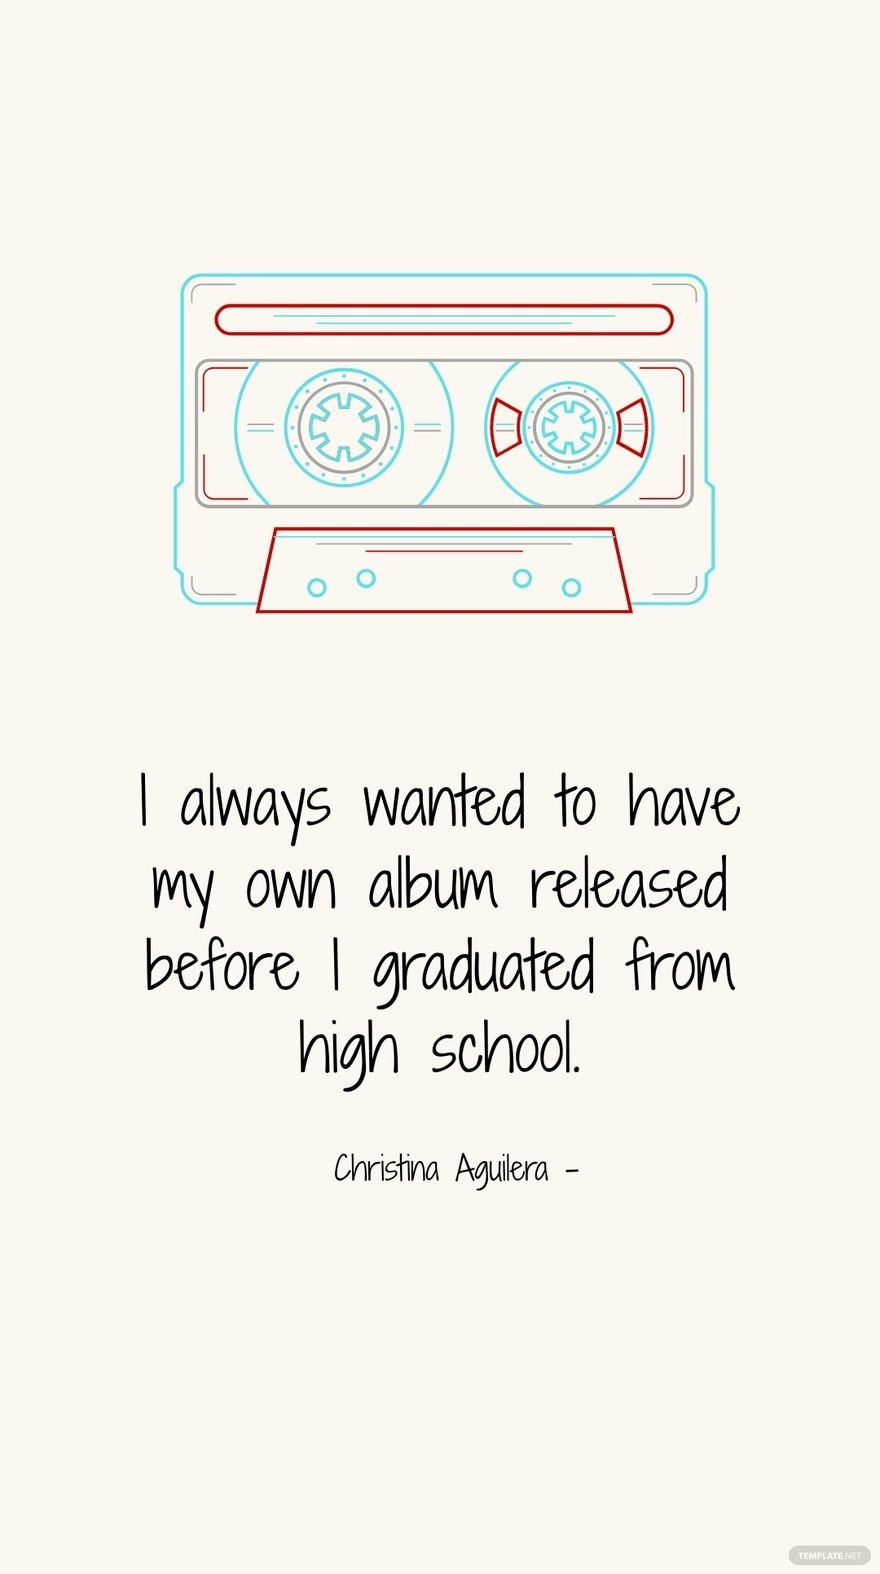 Christina Aguilera - I always wanted to have my own album released before I graduated from high school.